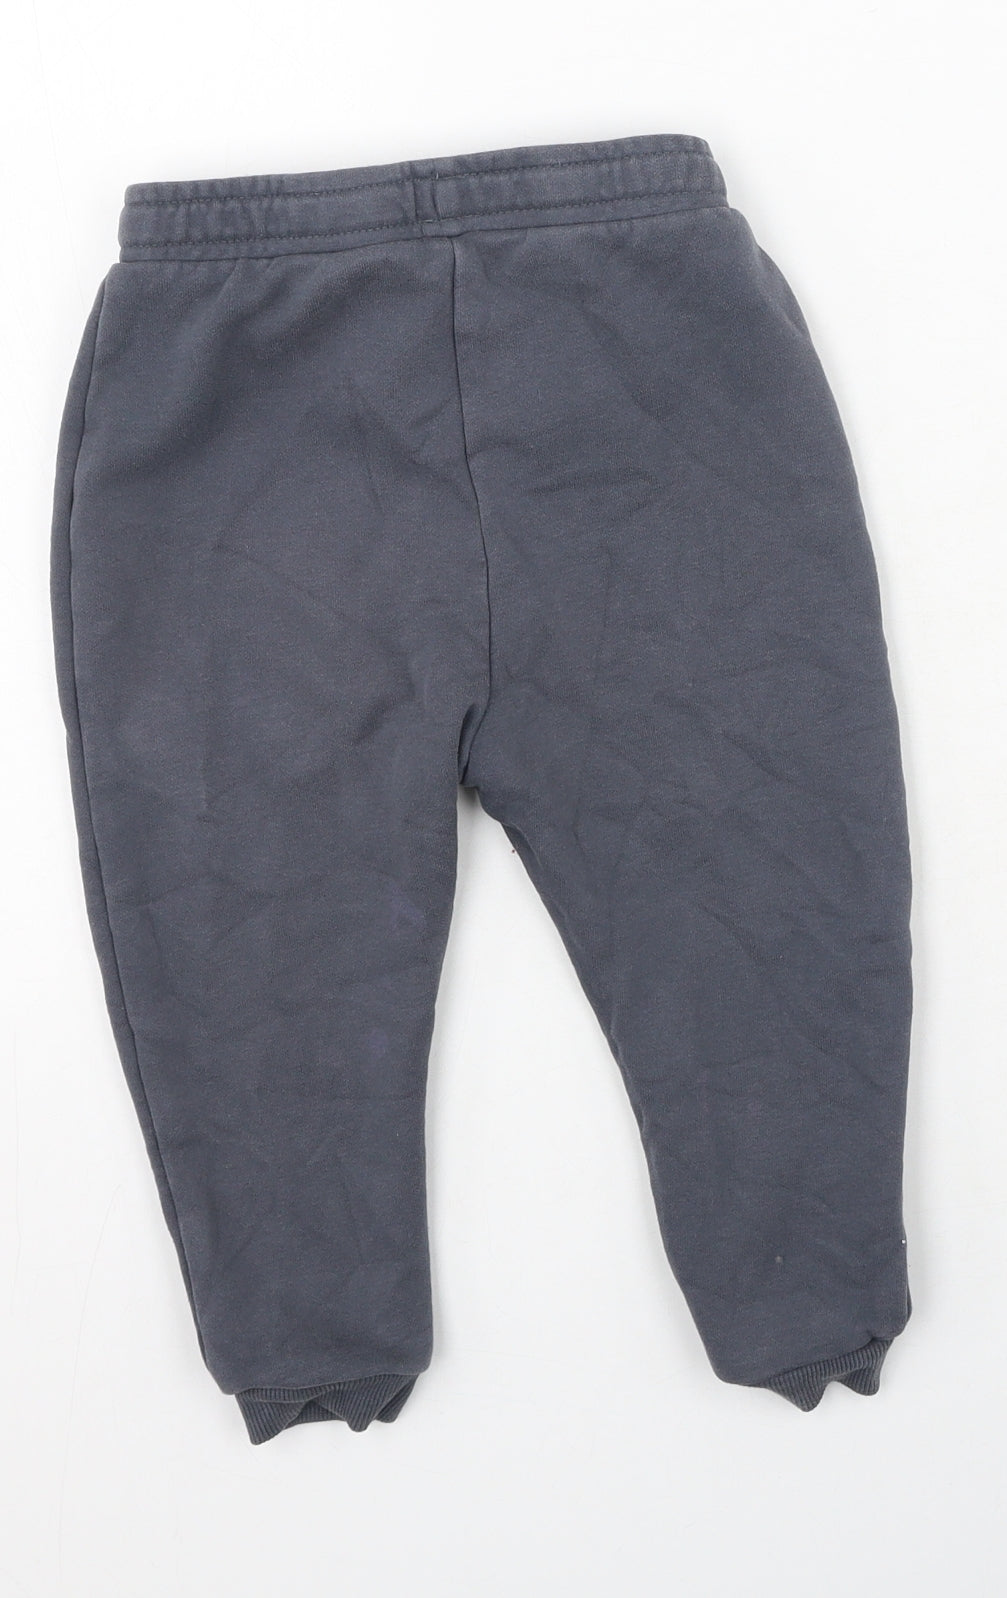 George  Girls Grey  Cotton Jogger Trousers Size 2-3 Years  Regular